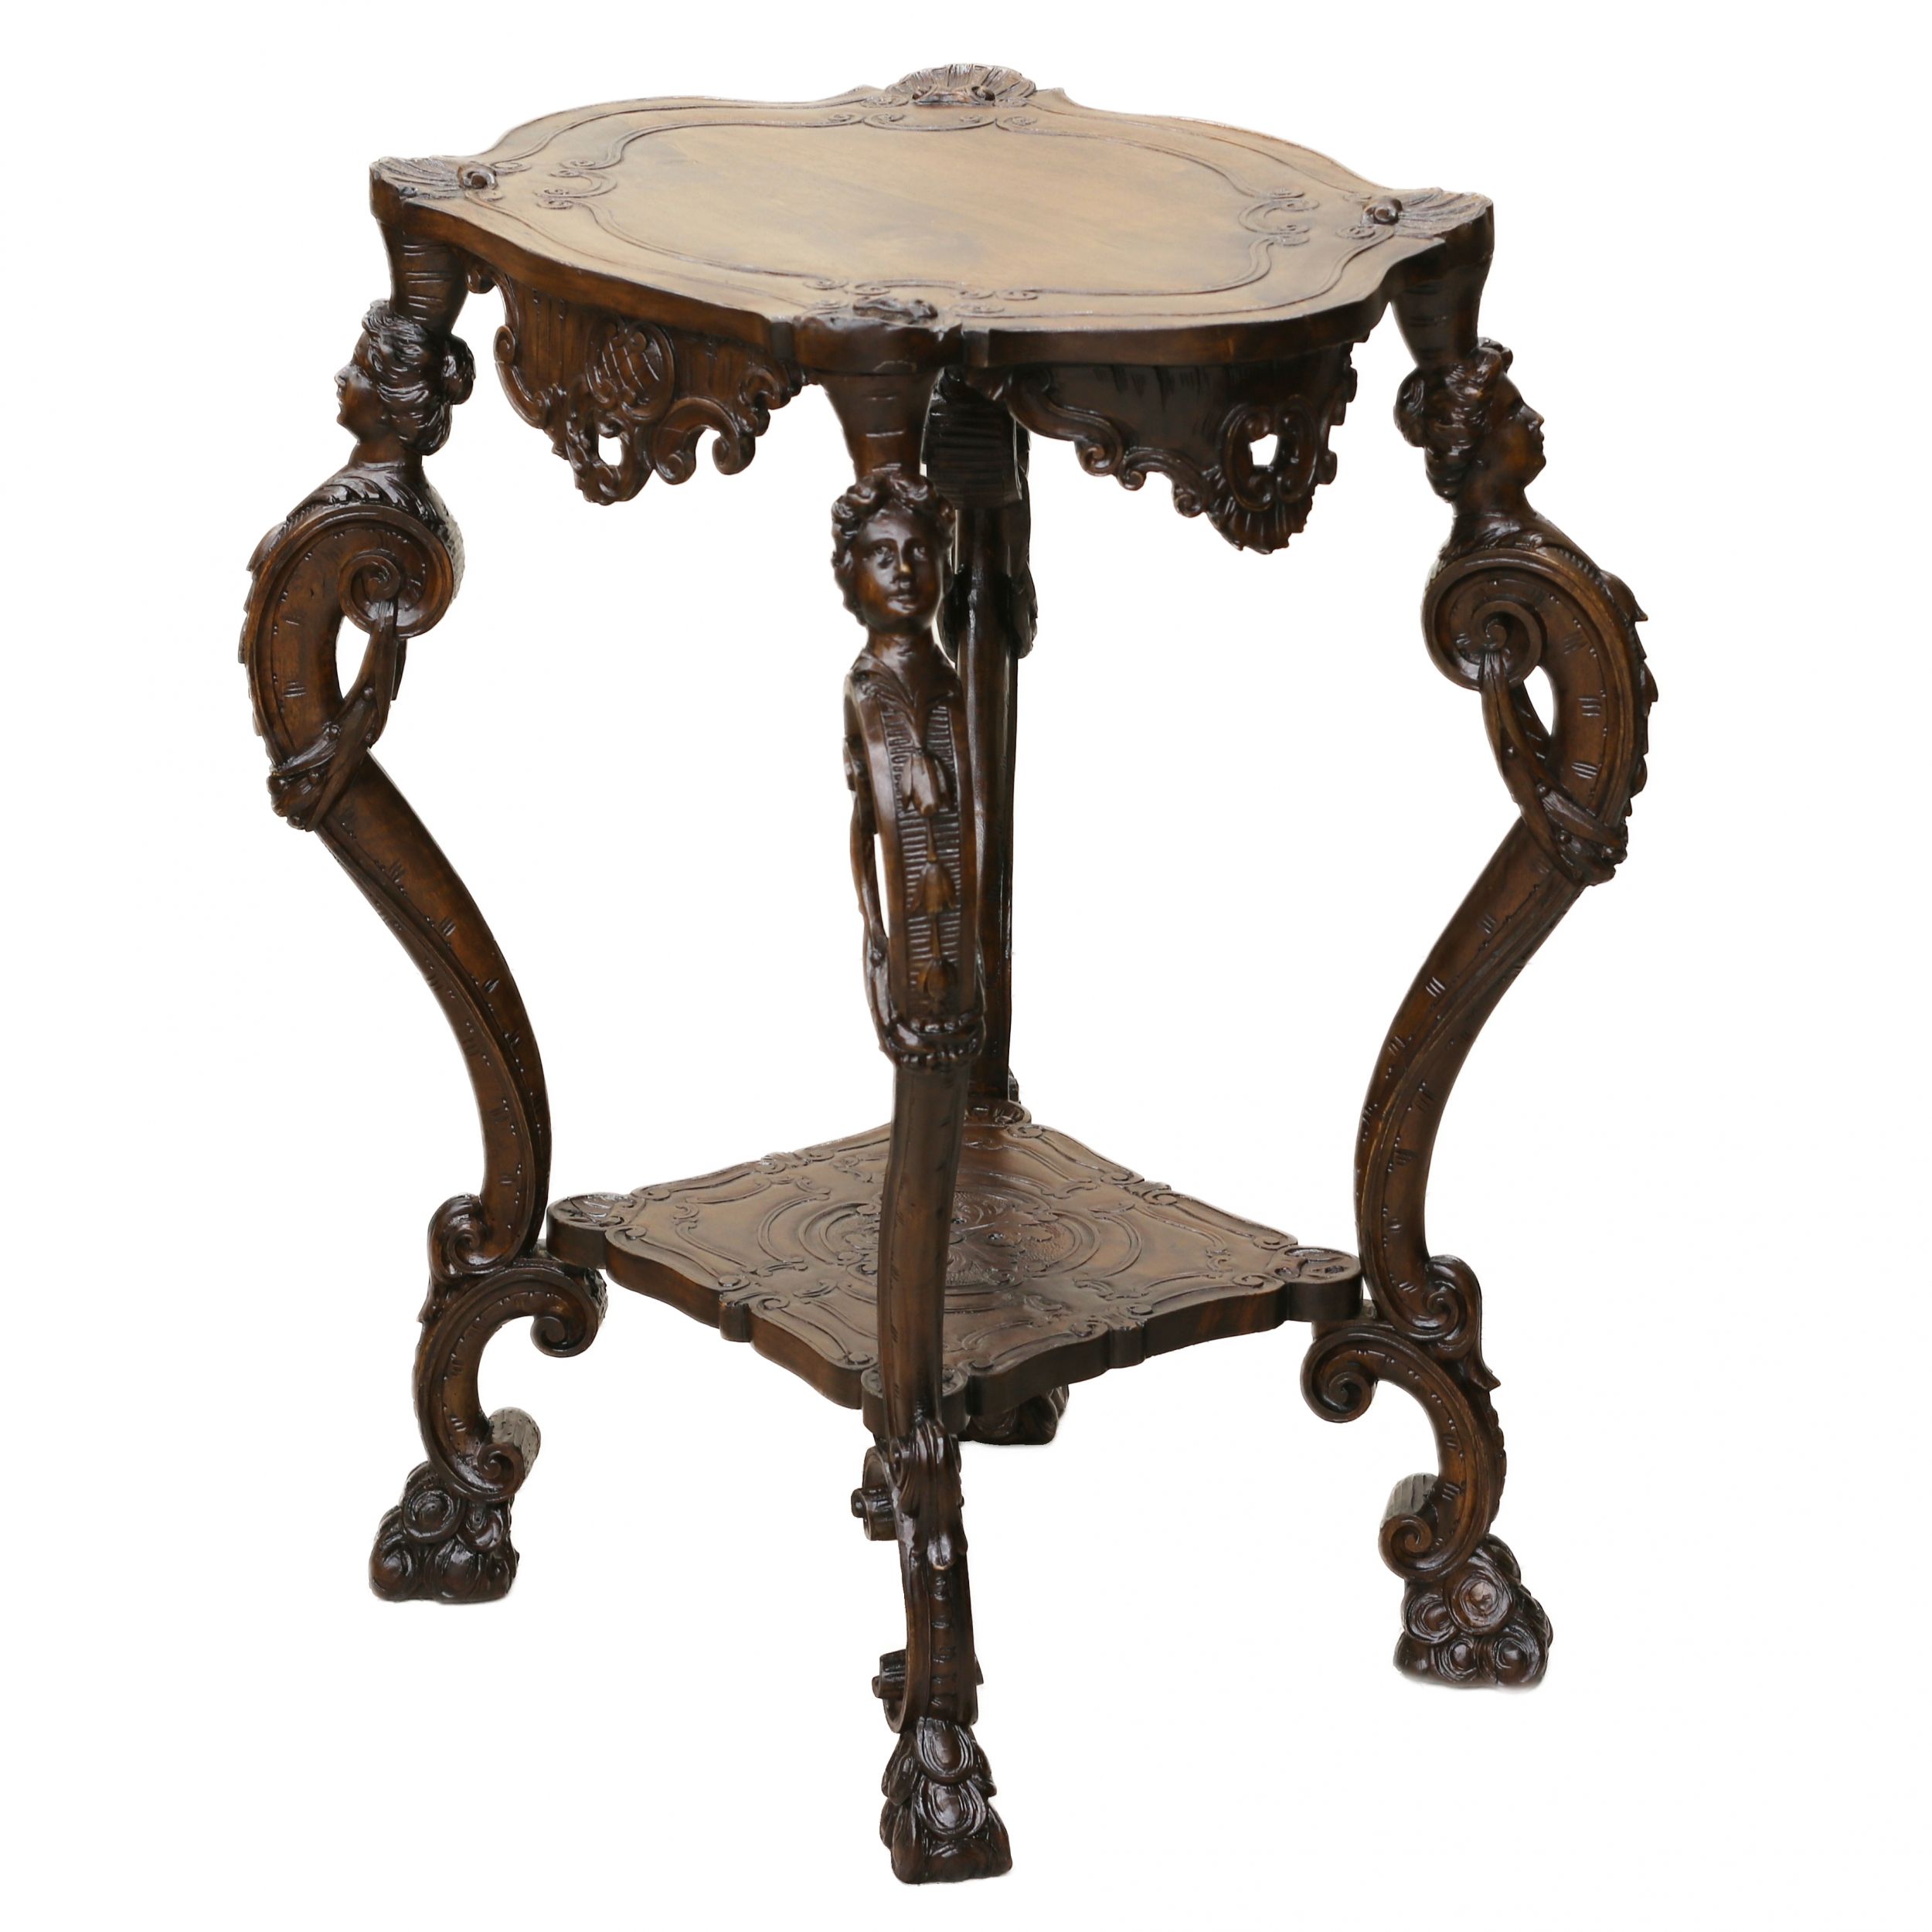 Carved wooden table in neo-Rococo style from the turn of the 19th century. - Image 3 of 7